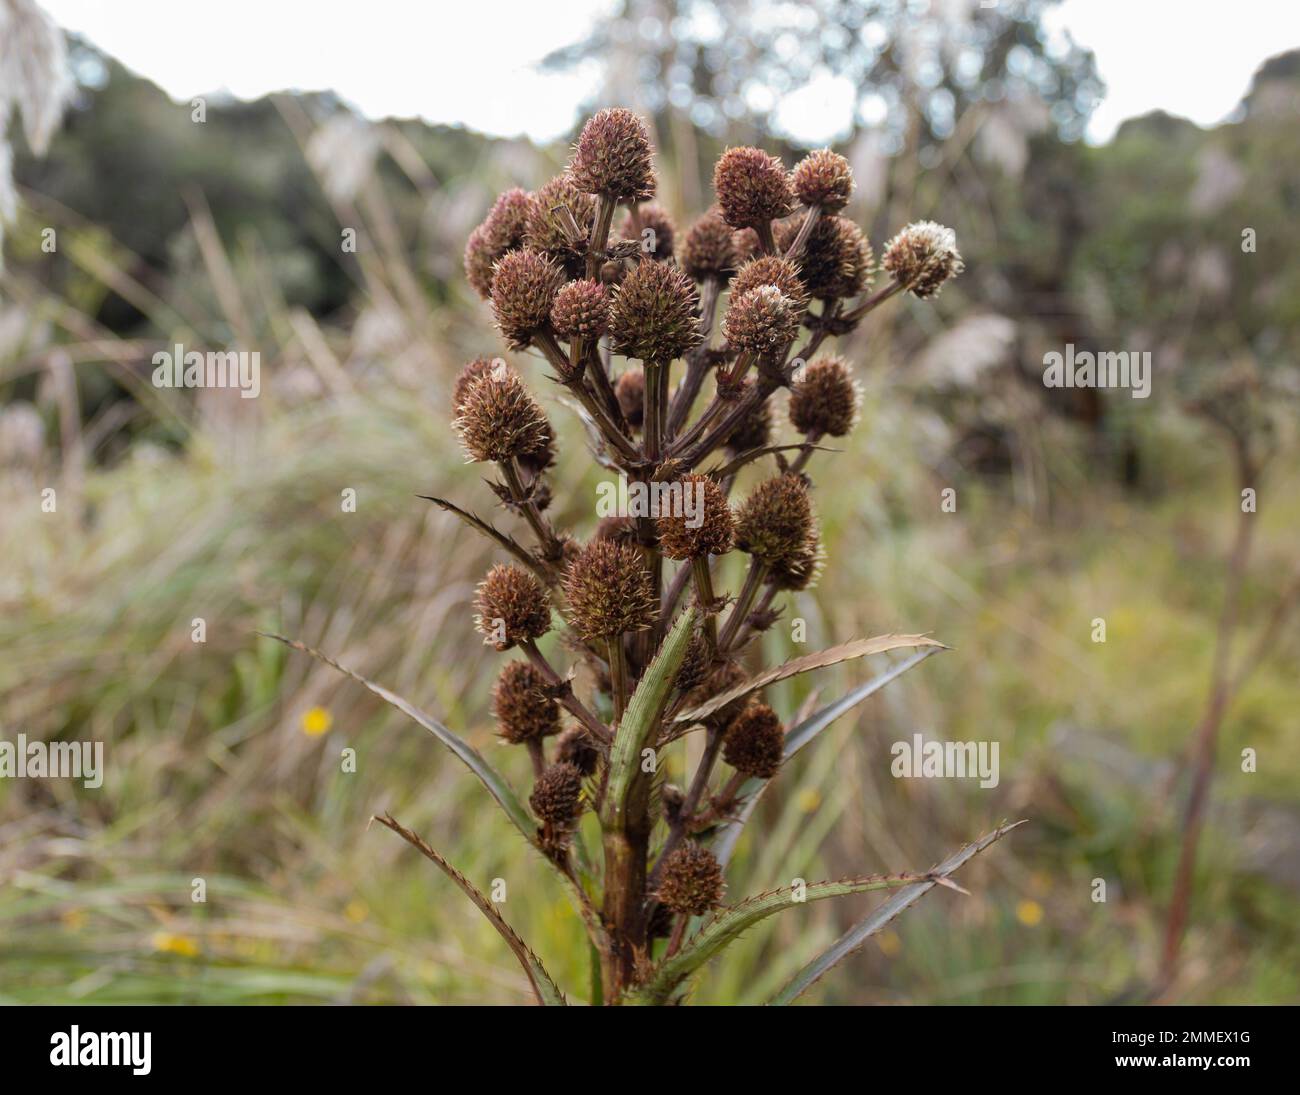 Close up to a wild brown spined flower at colombian badland countryside Stock Photo